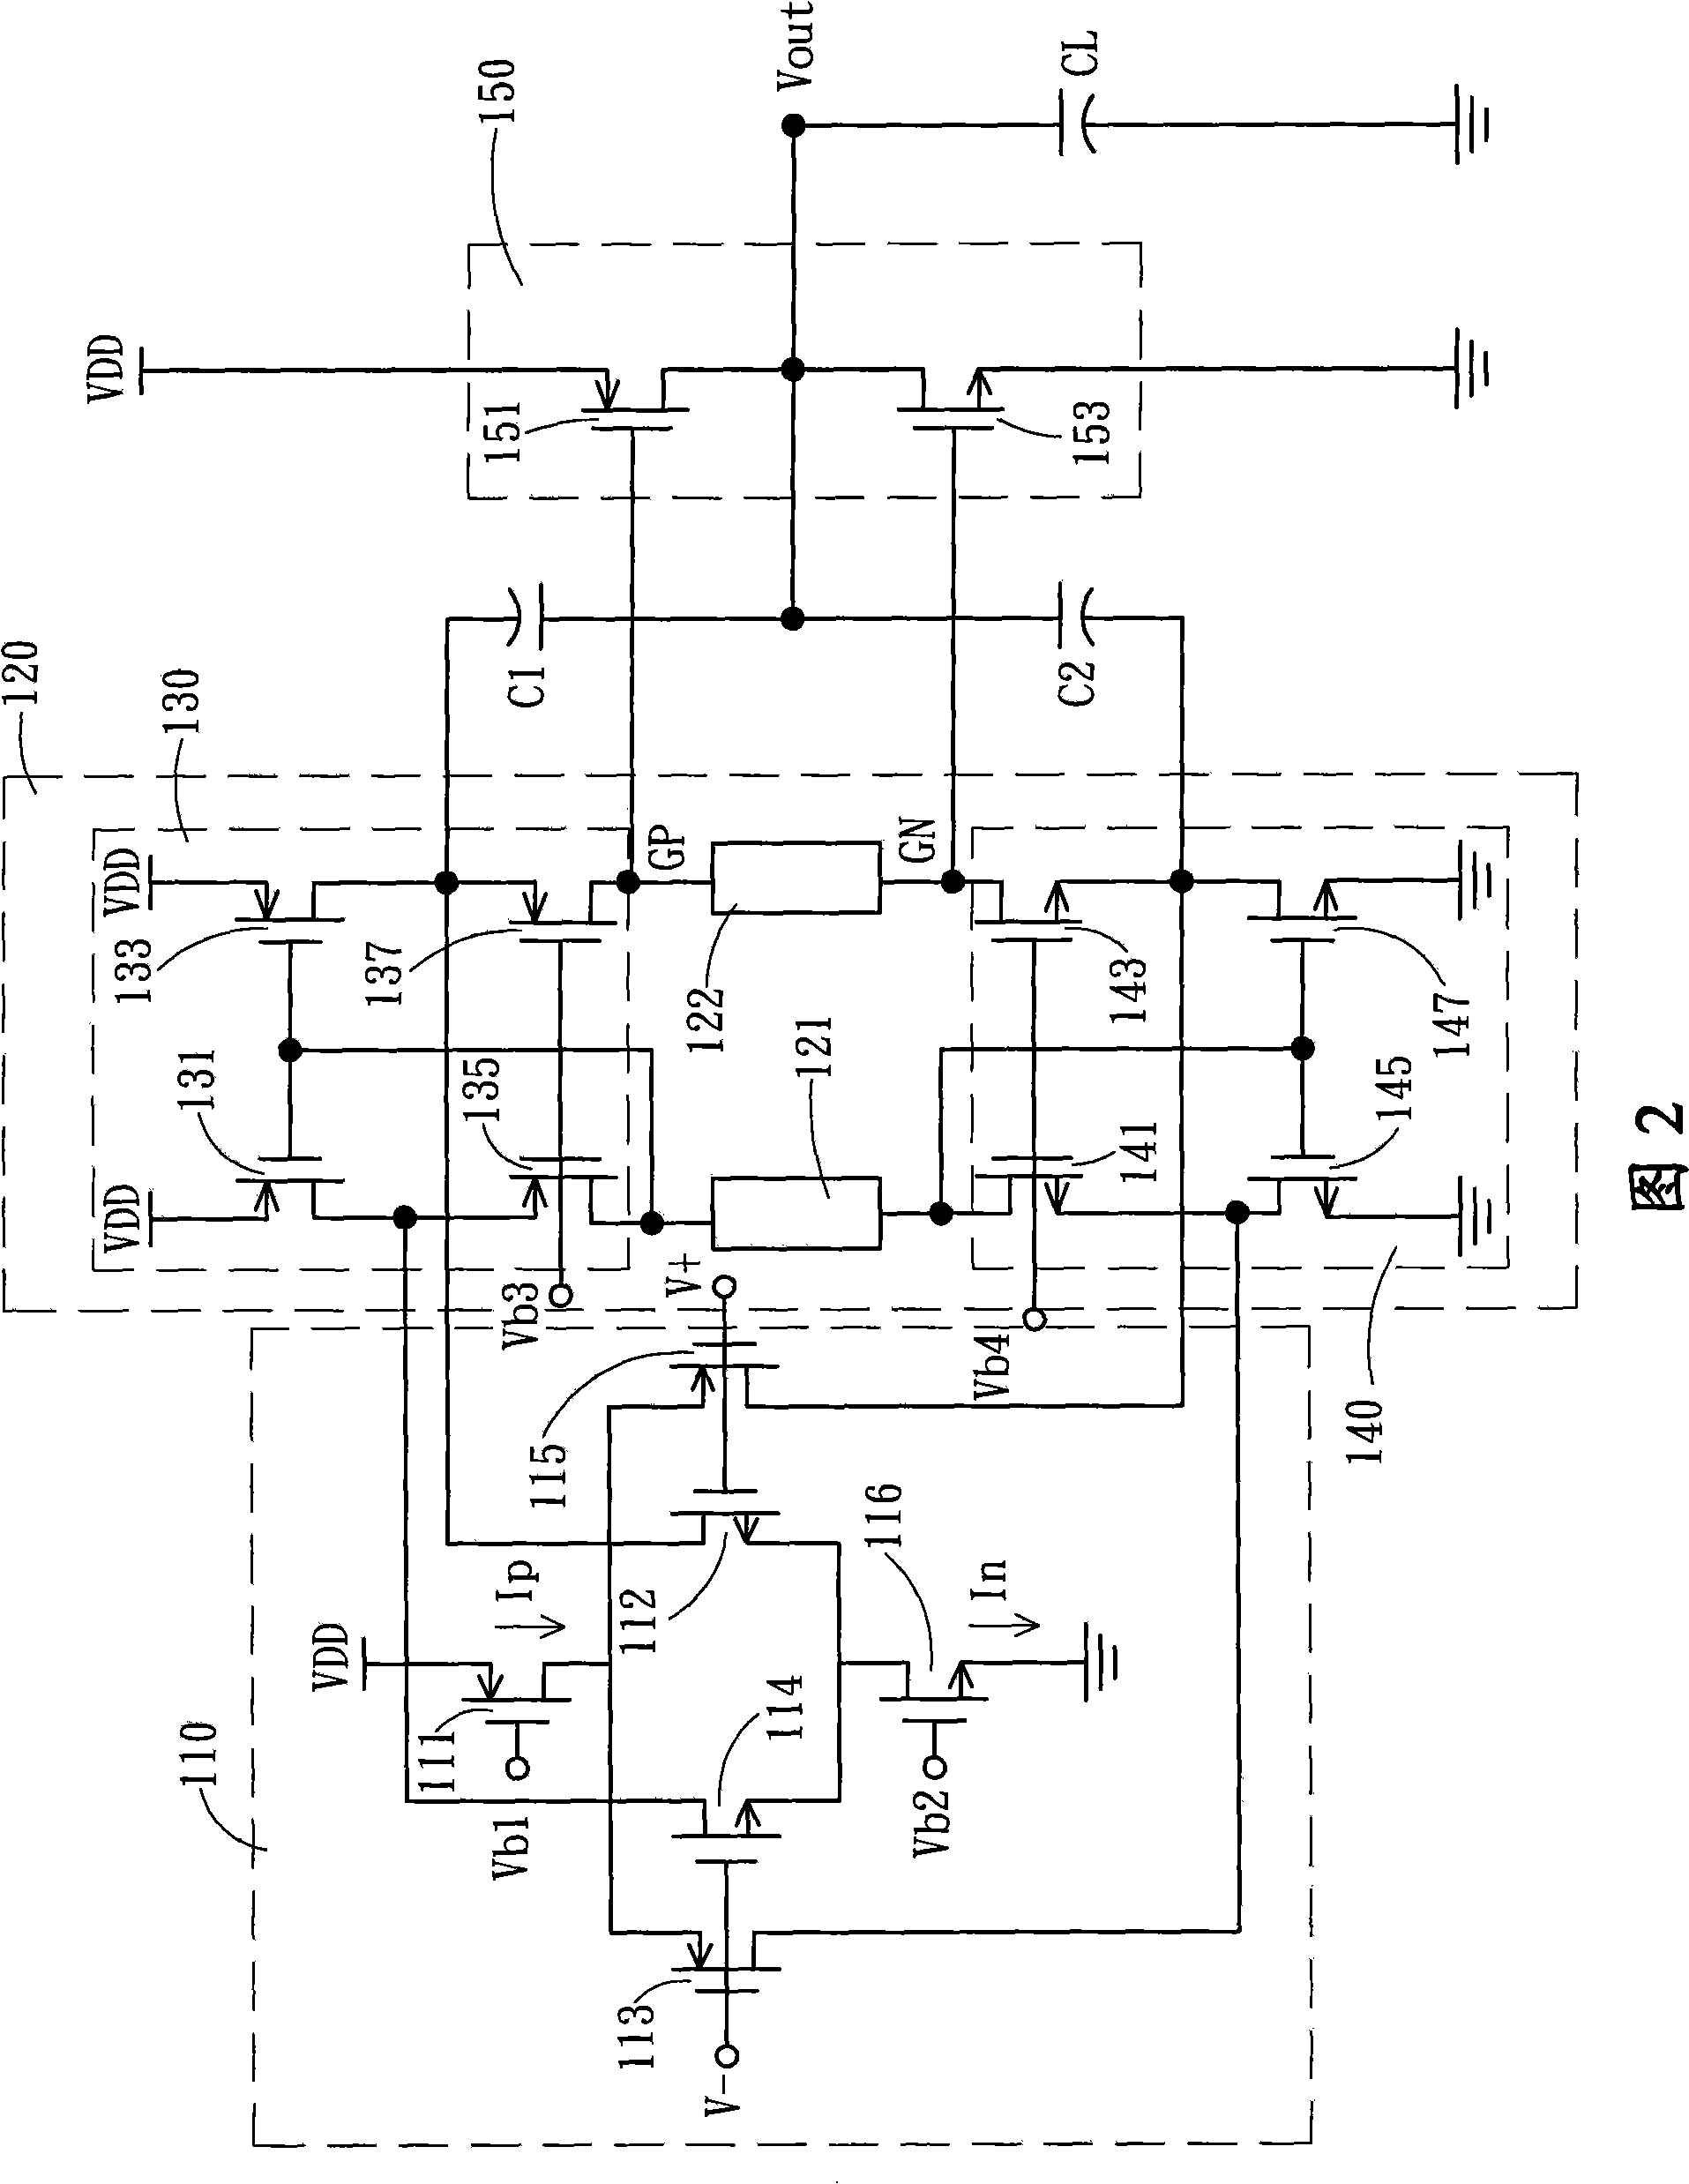 Apparatus for increasing turn rate of operational amplifier